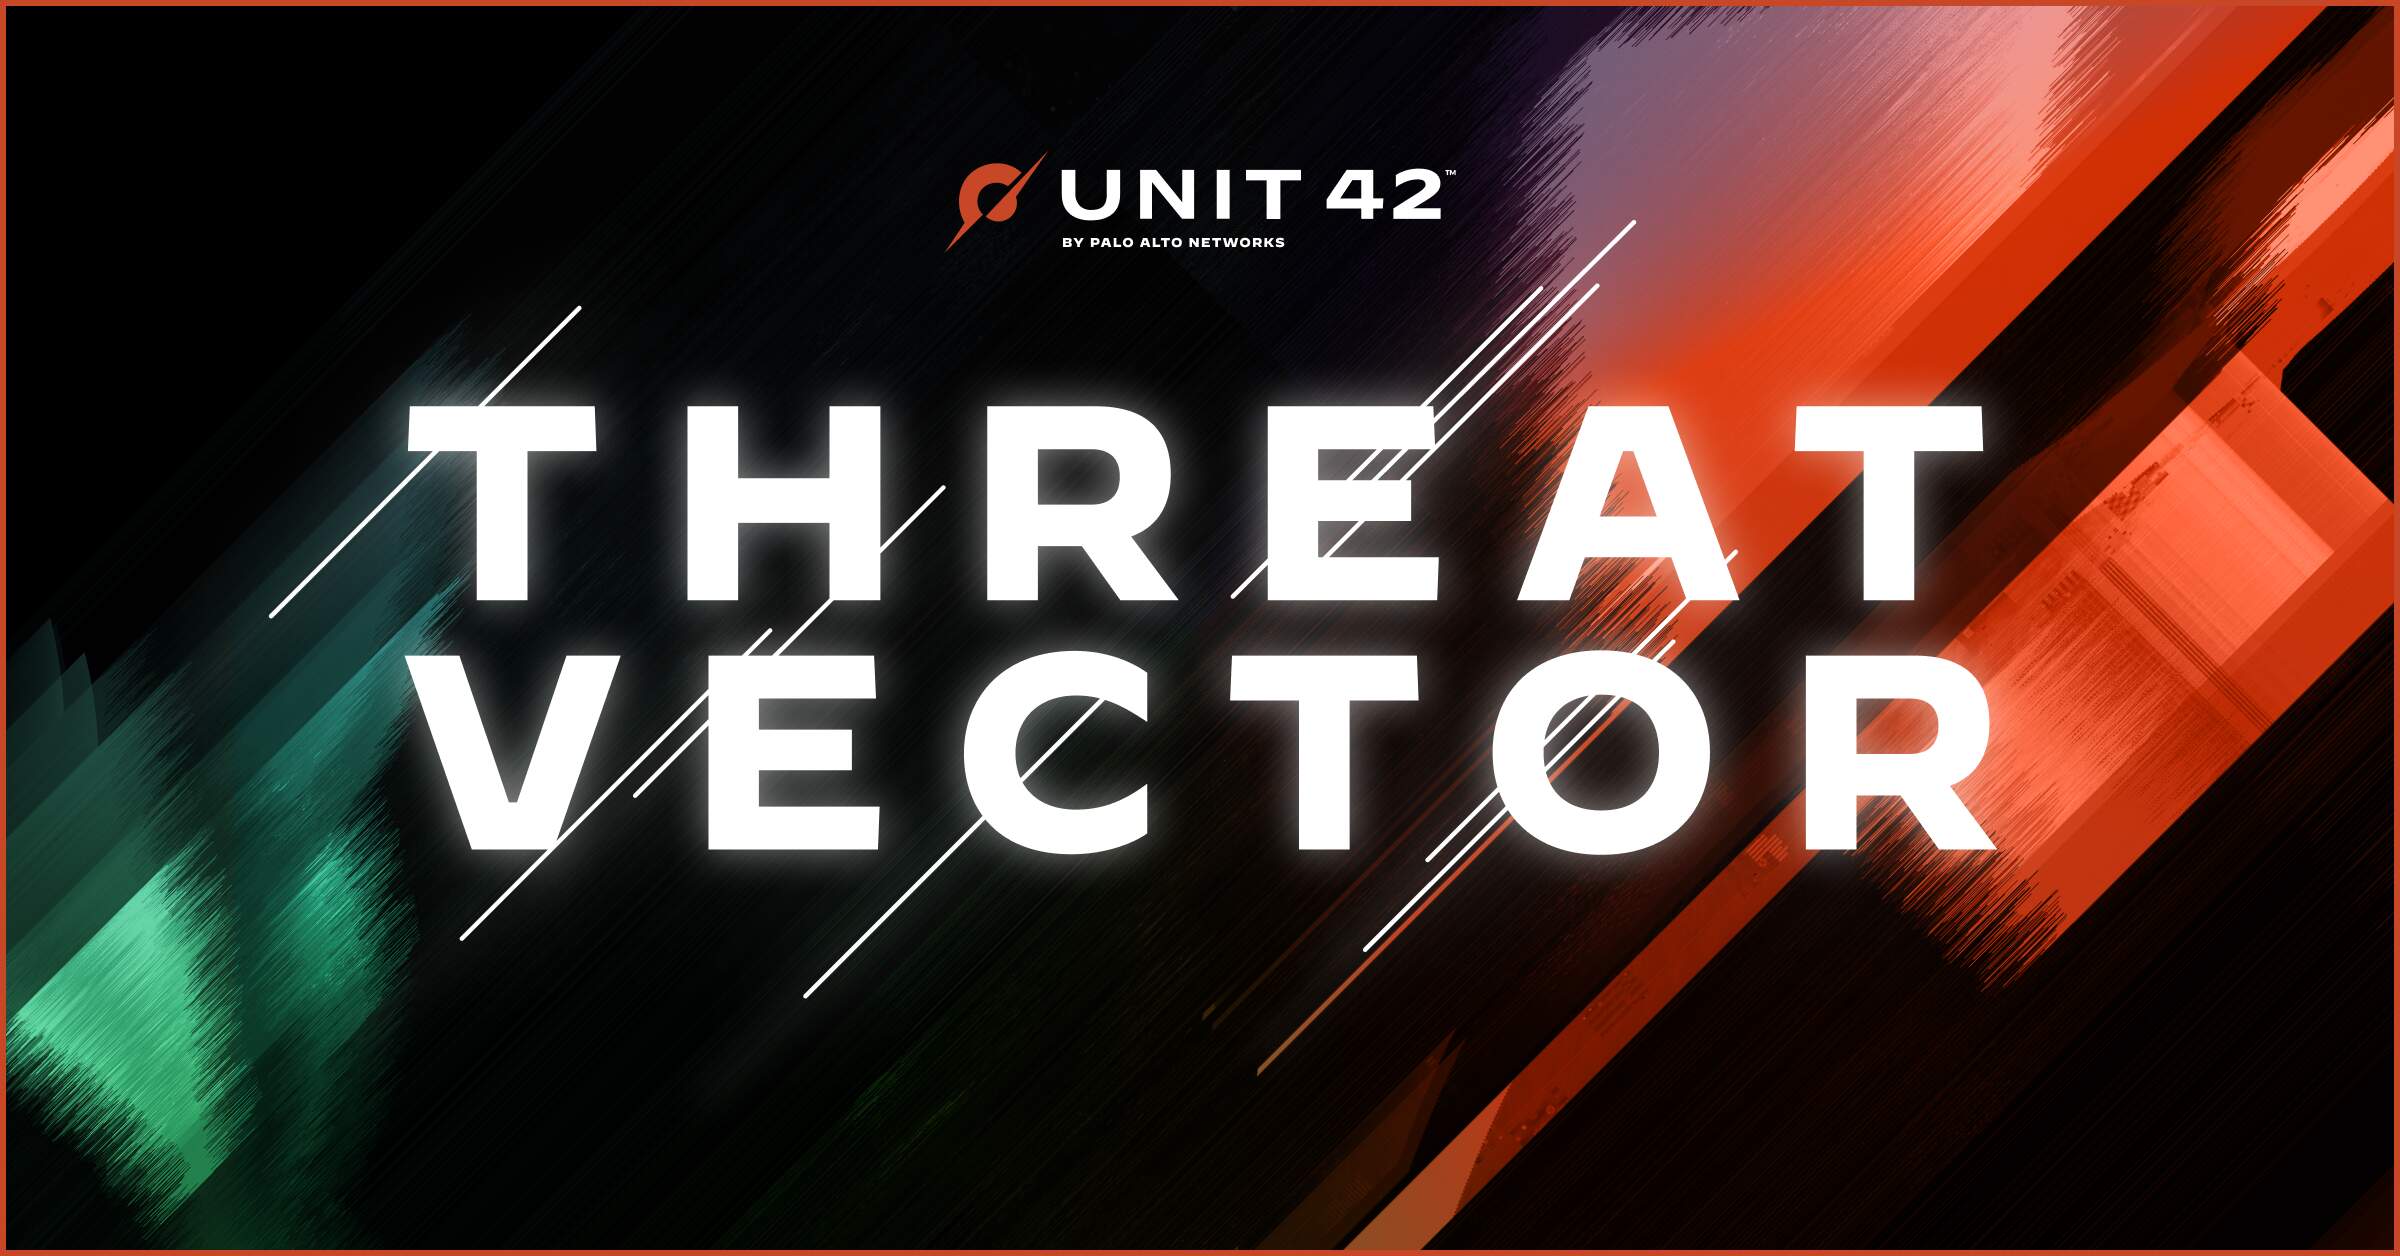 N2K and Unit 42 by Palo Alto Networks expand Threat Vector into a standalone podcast on N2K media network